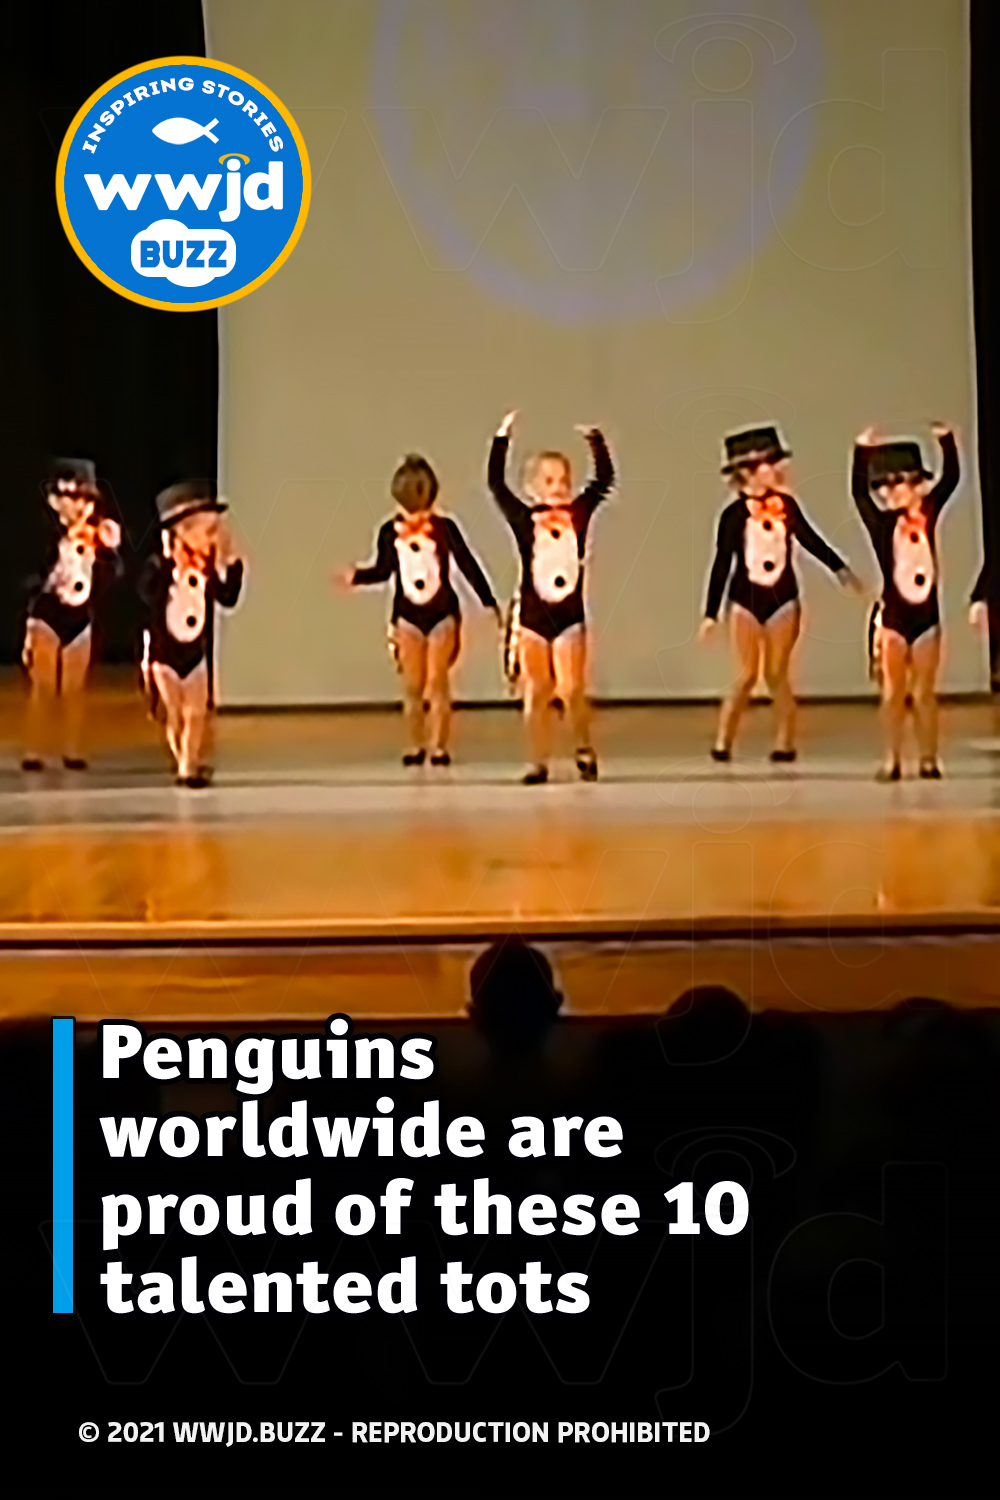 Penguins worldwide are proud of these 10 talented tots